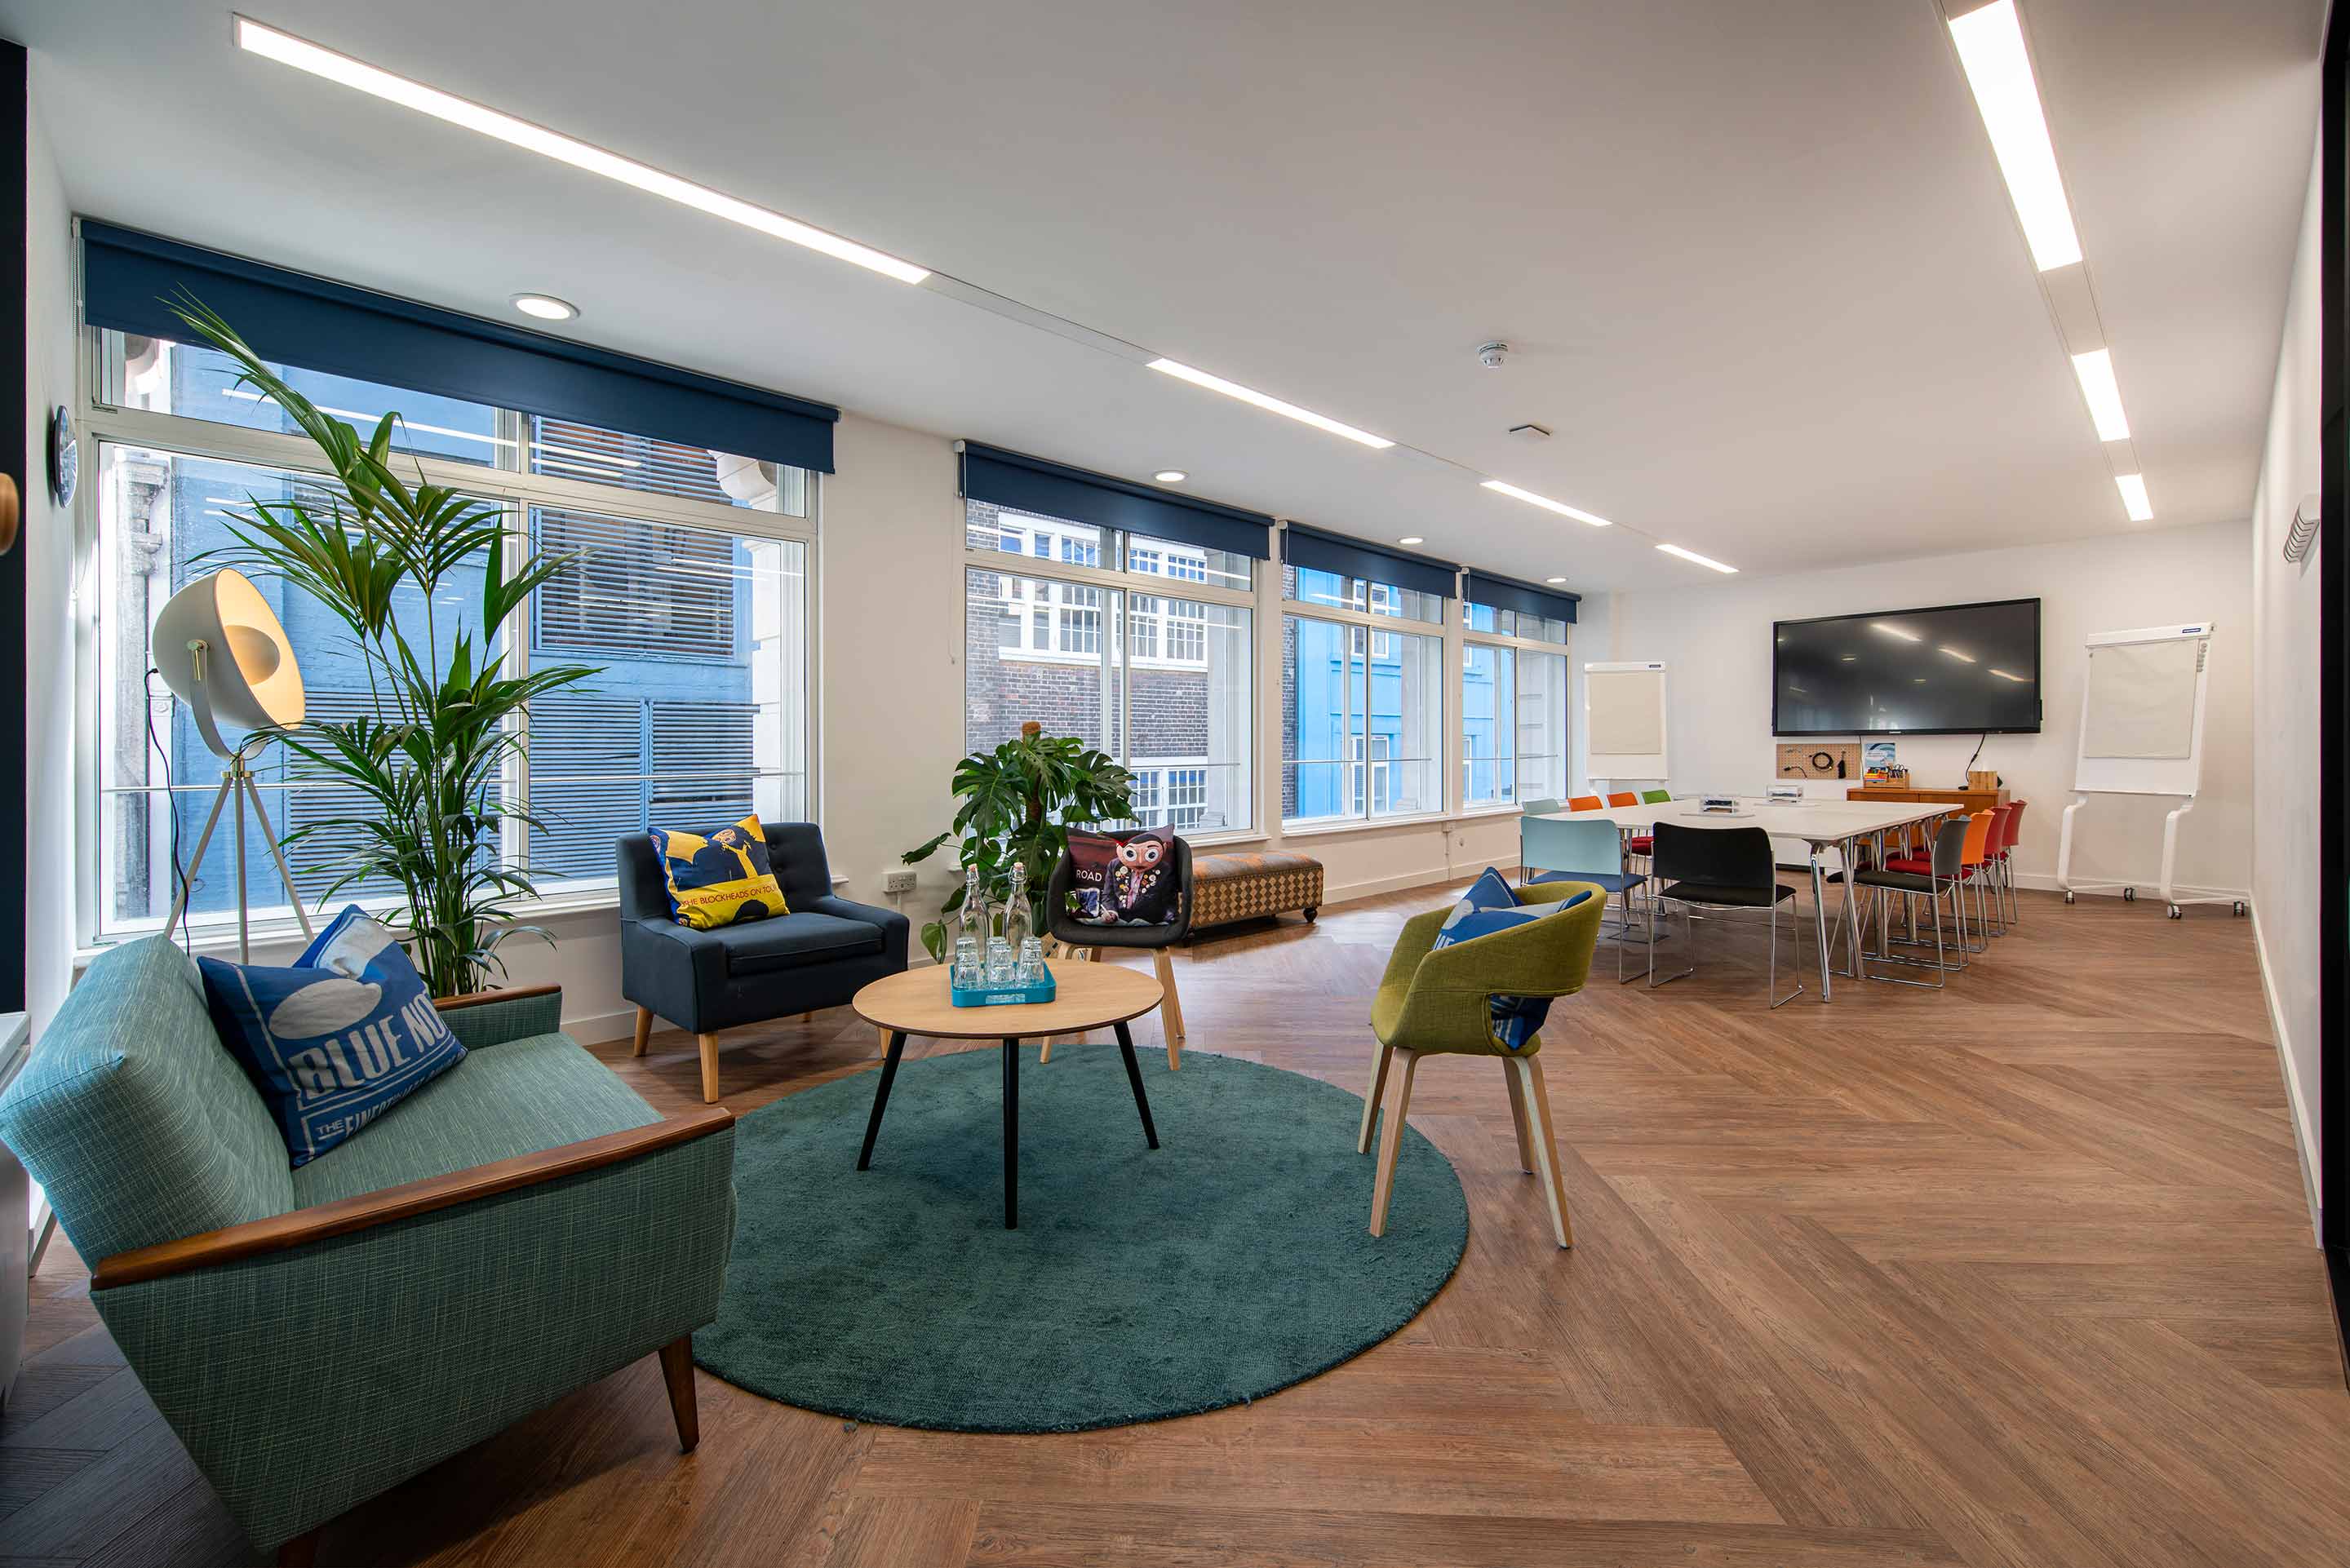 Seating and desking in a social space and collaboration area